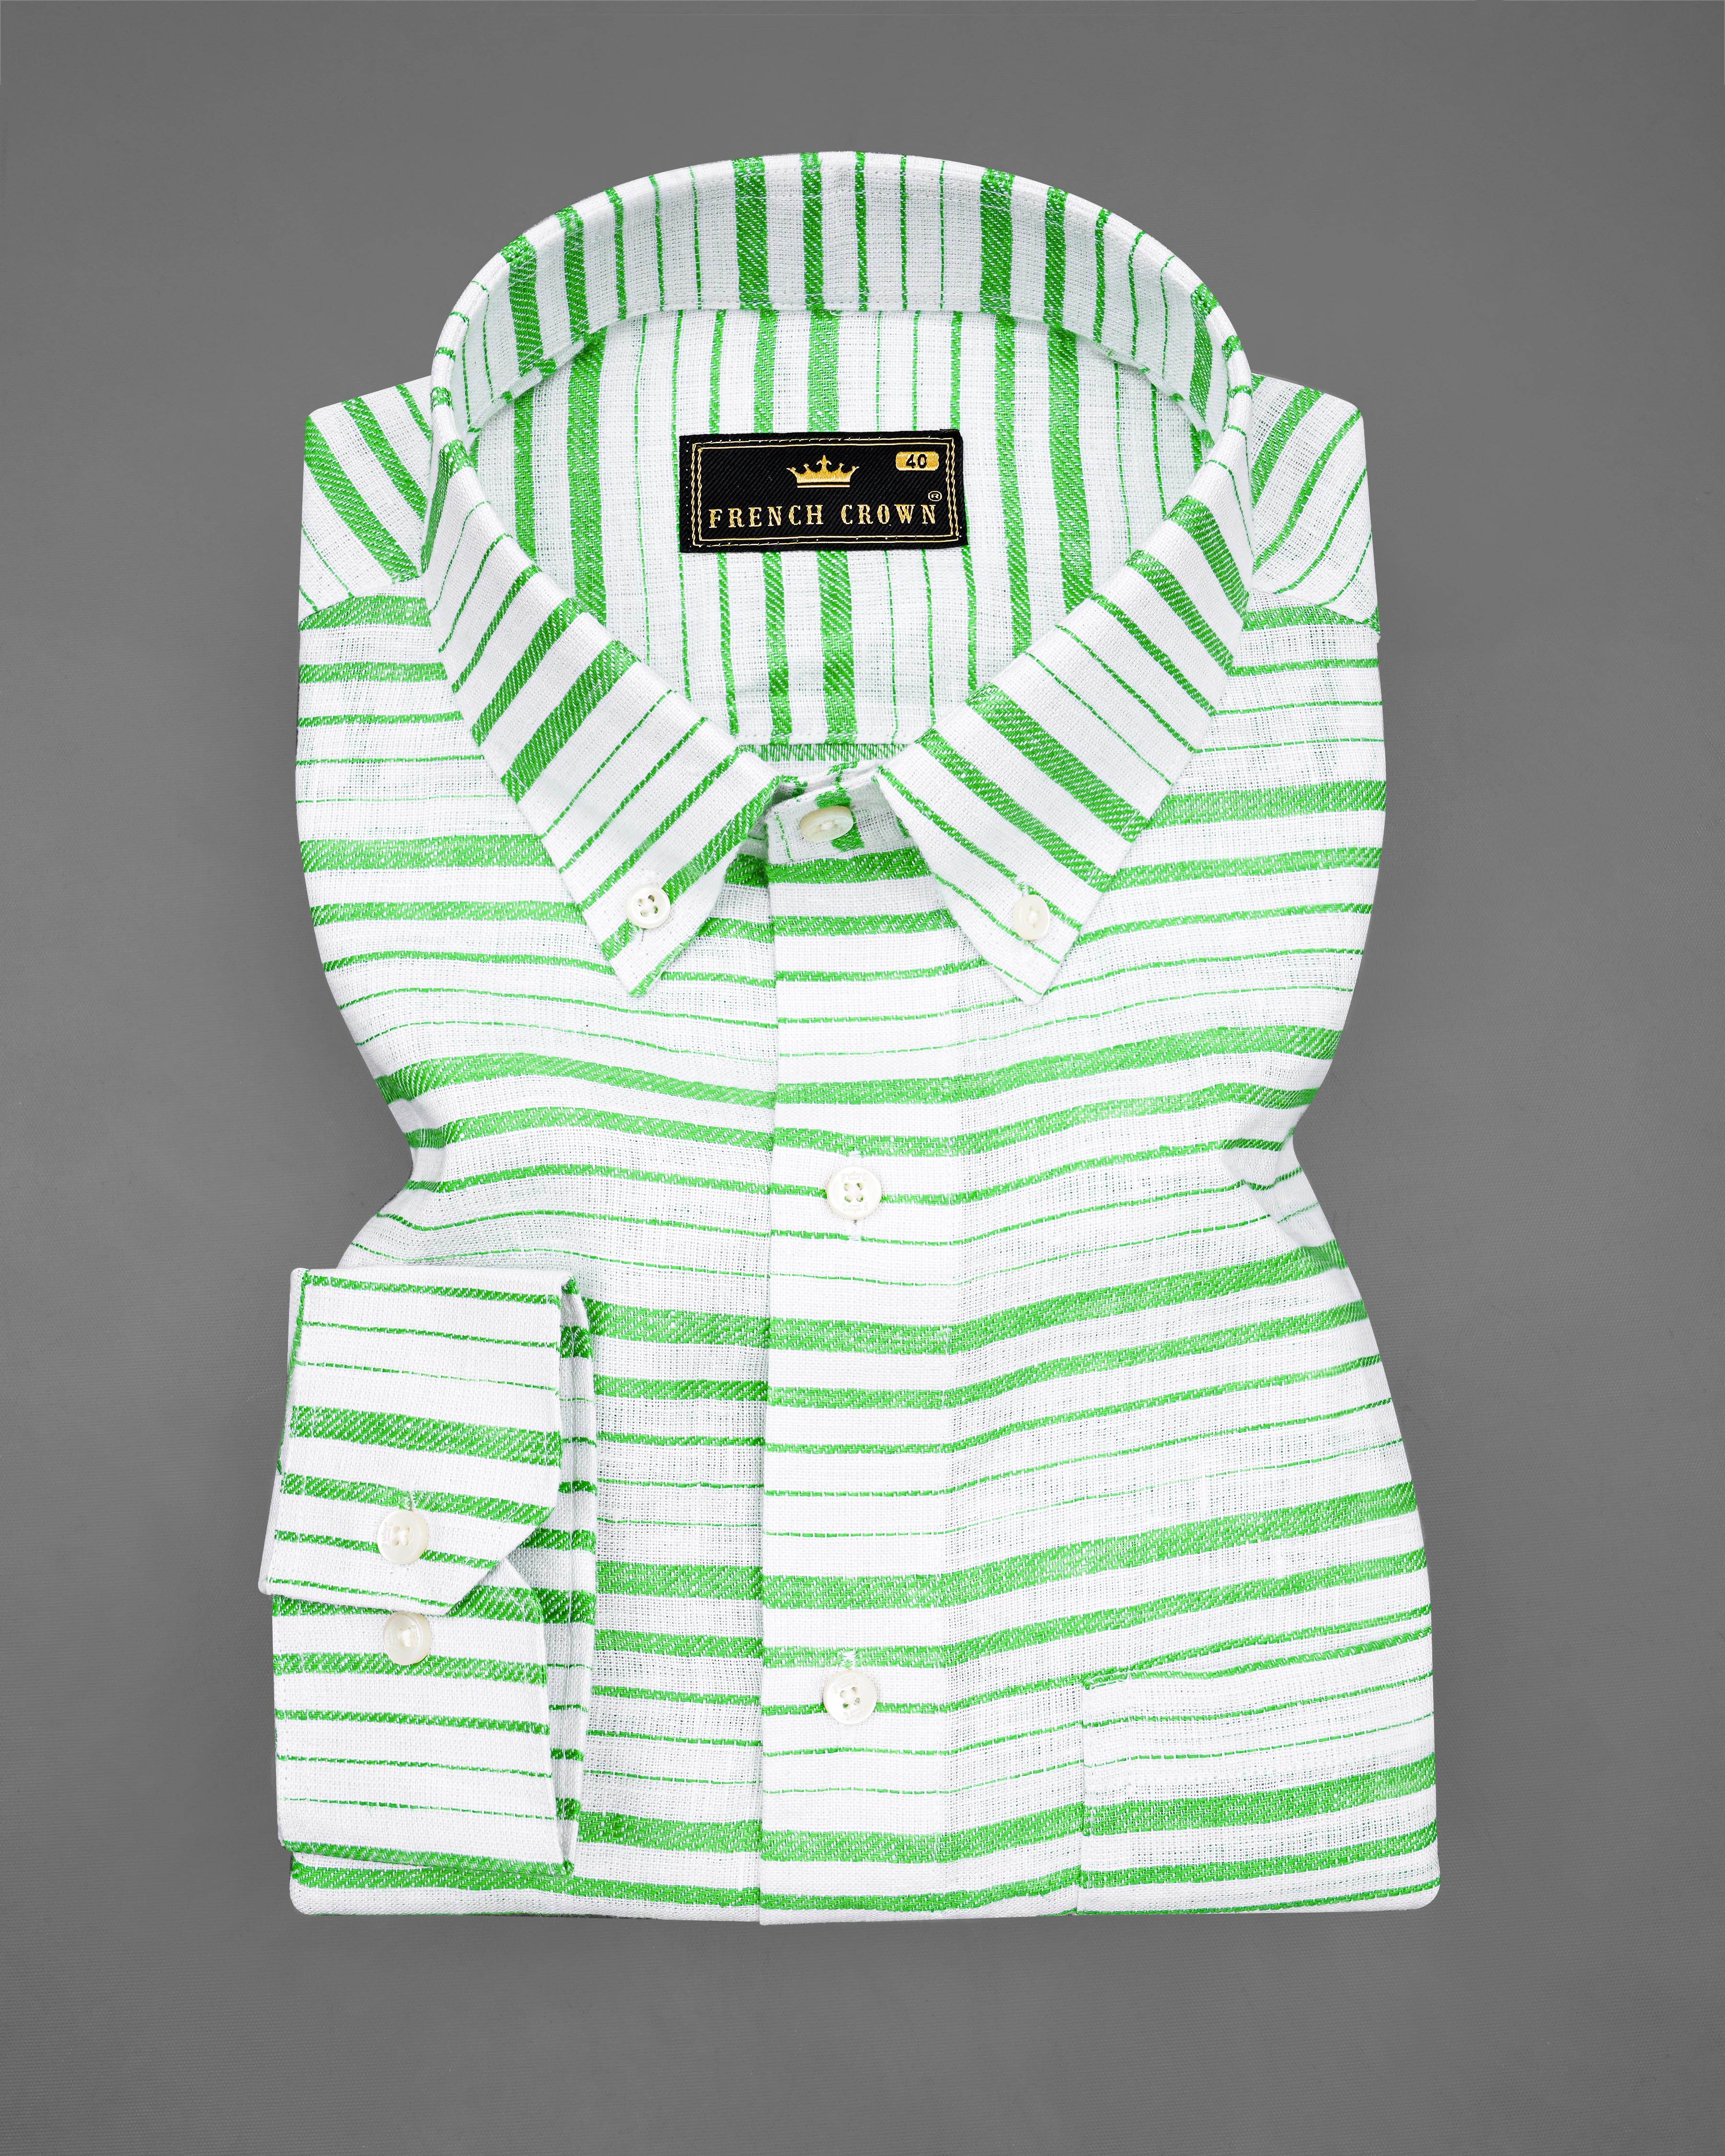 Bright White and Chateau Green Striped Luxurious Linen Shirt 8283-BD-38, 8283-BD-H-38, 8283-BD-39, 8283-BD-H-39, 8283-BD-40, 8283-BD-H-40, 8283-BD-42, 8283-BD-H-42, 8283-BD-44, 8283-BD-H-44, 8283-BD-46, 8283-BD-H-46, 8283-BD-48, 8283-BD-H-48, 8283-BD-50, 8283-BD-H-50, 8283-BD-52, 8283-BD-H-52